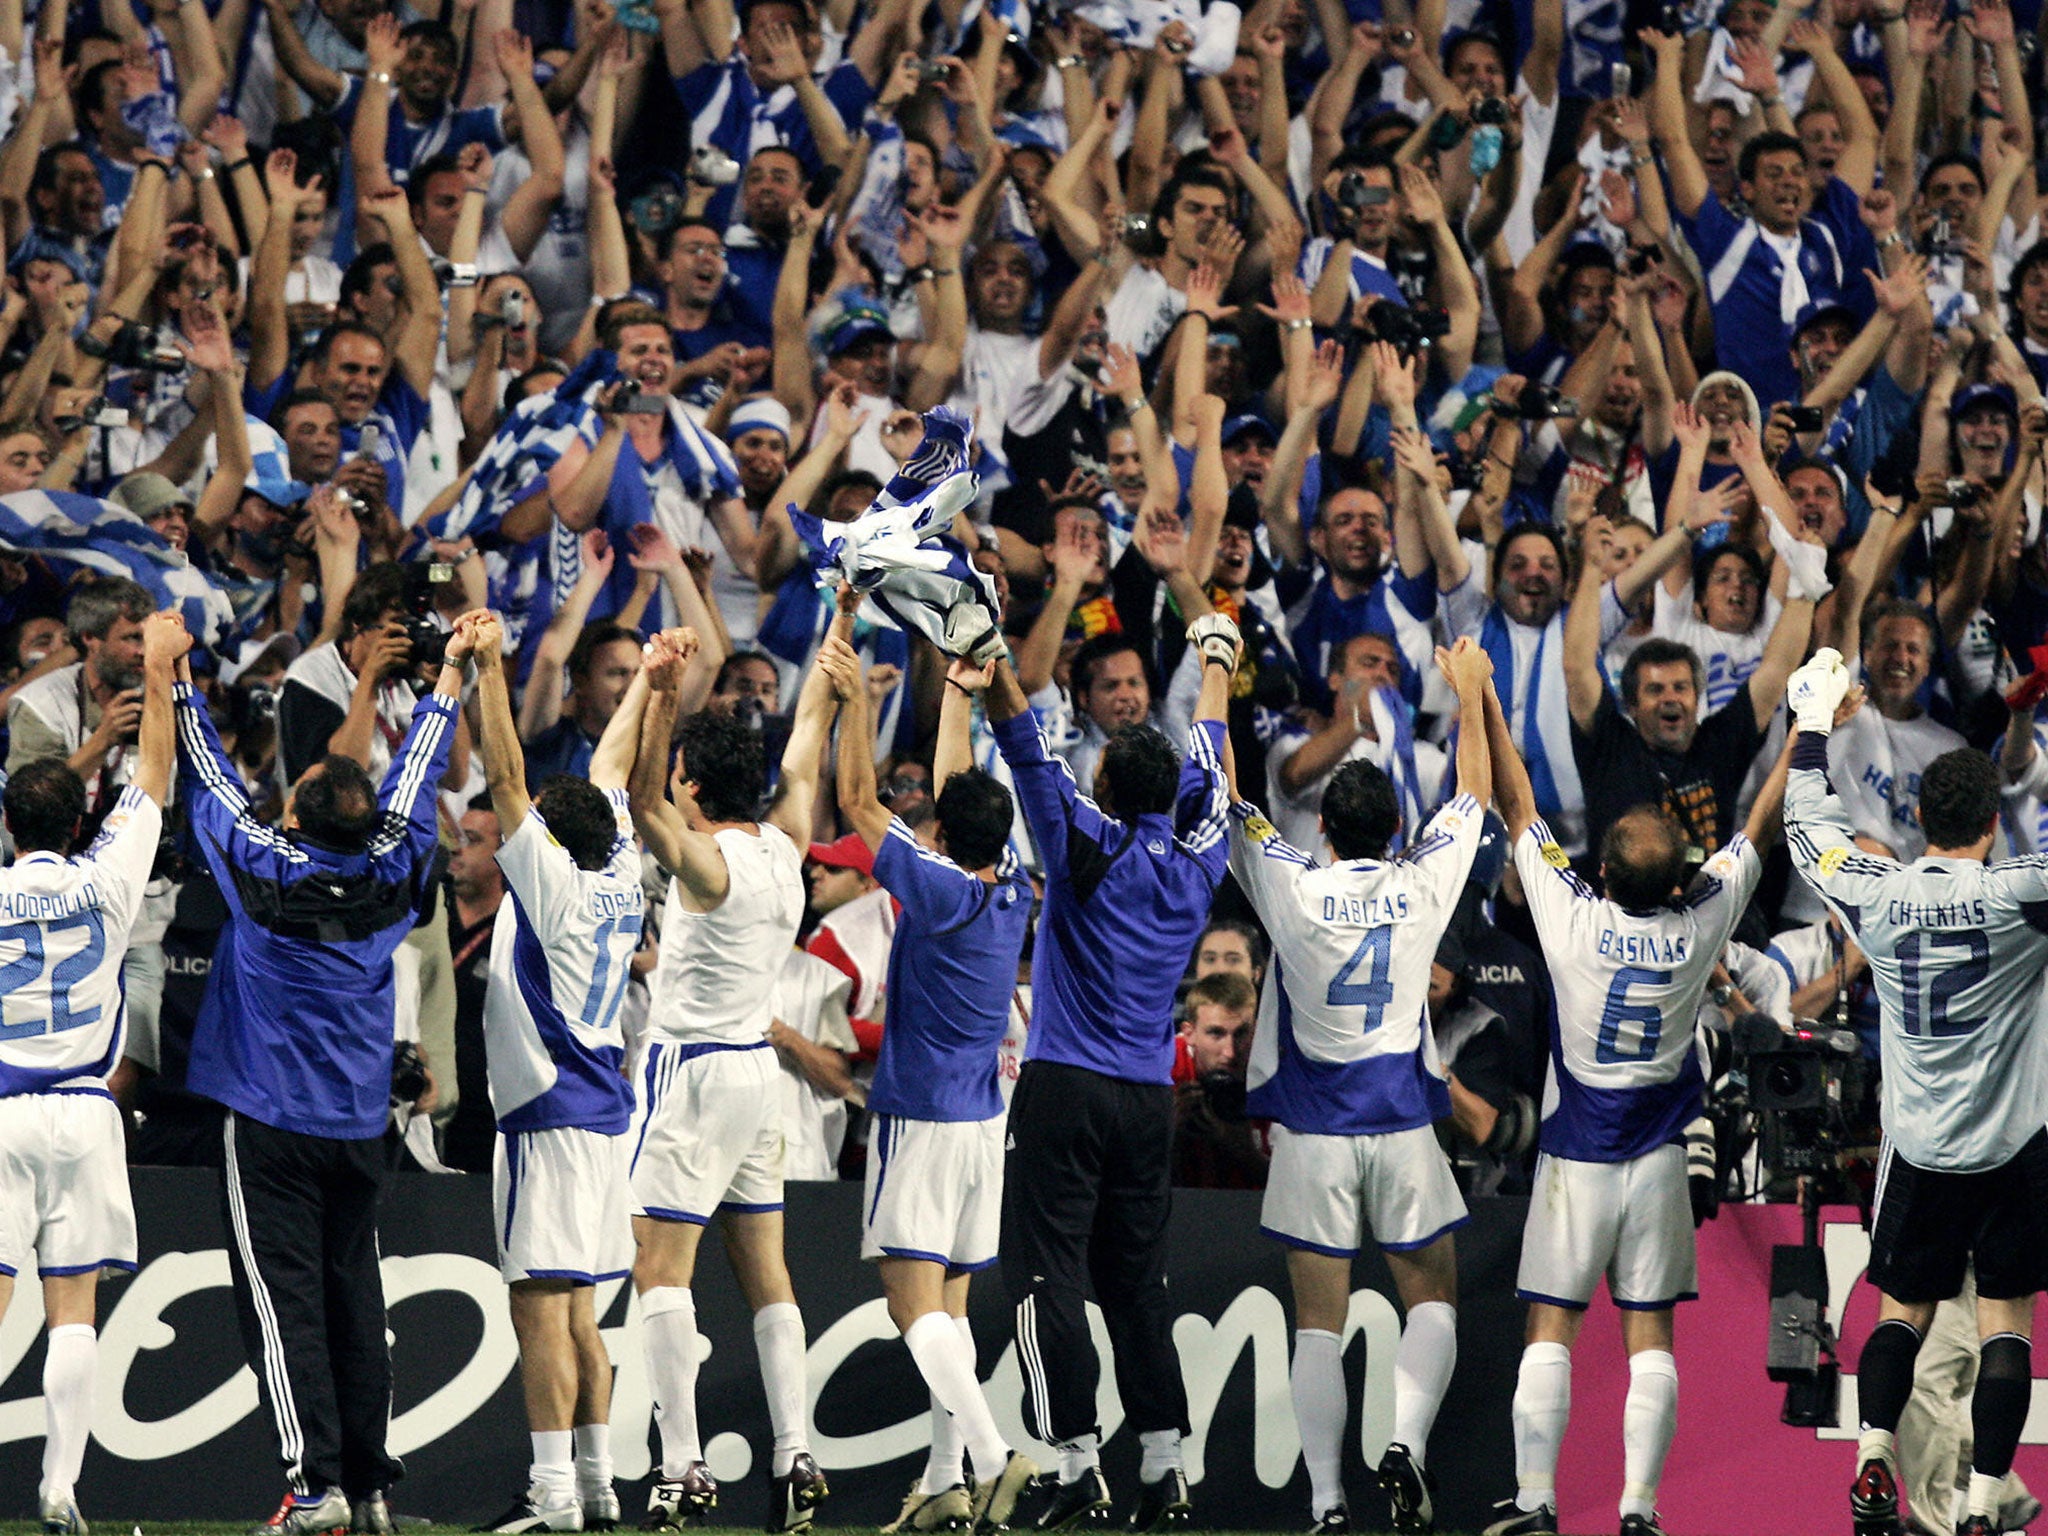 The players and fans of Greece celebrate as one